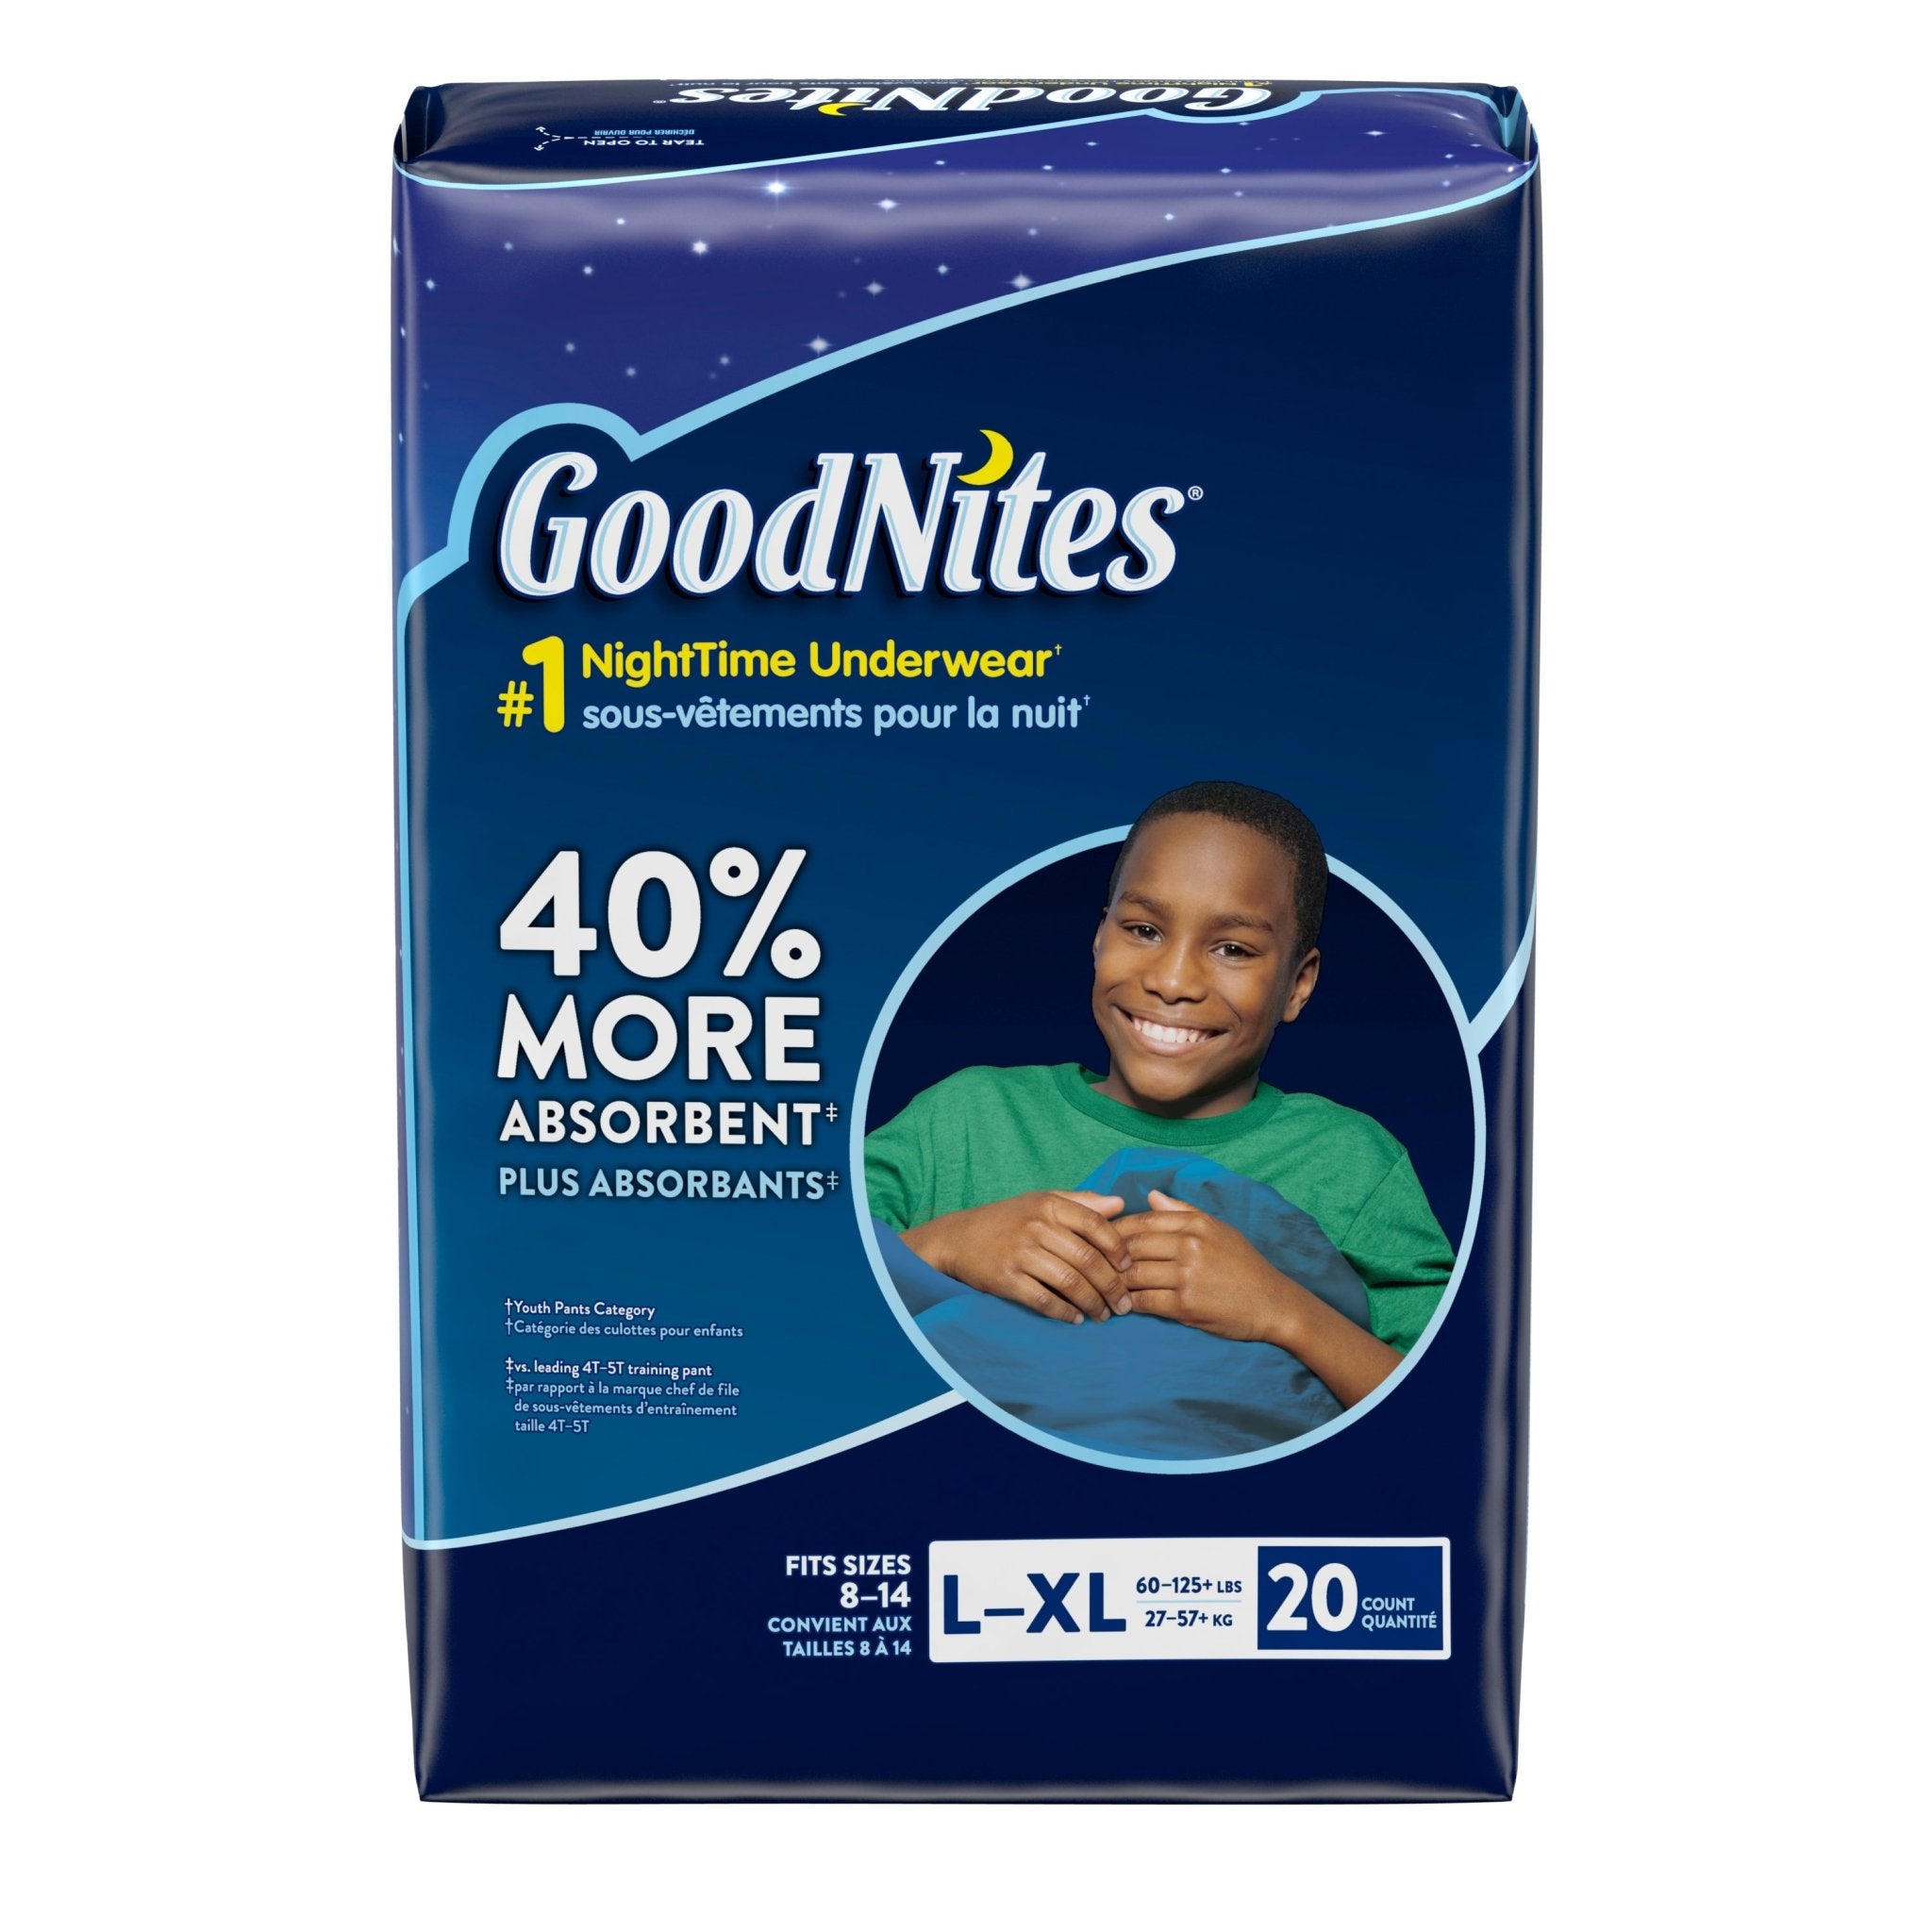 PK/20 - GoodNites Bedtime Bedwetting Underwear for Boys, L-XL, 20 Ct. (Packaging May Vary)&nbsp;- MANUFACTURER DISCONTINUED - Best Buy Medical Supplies